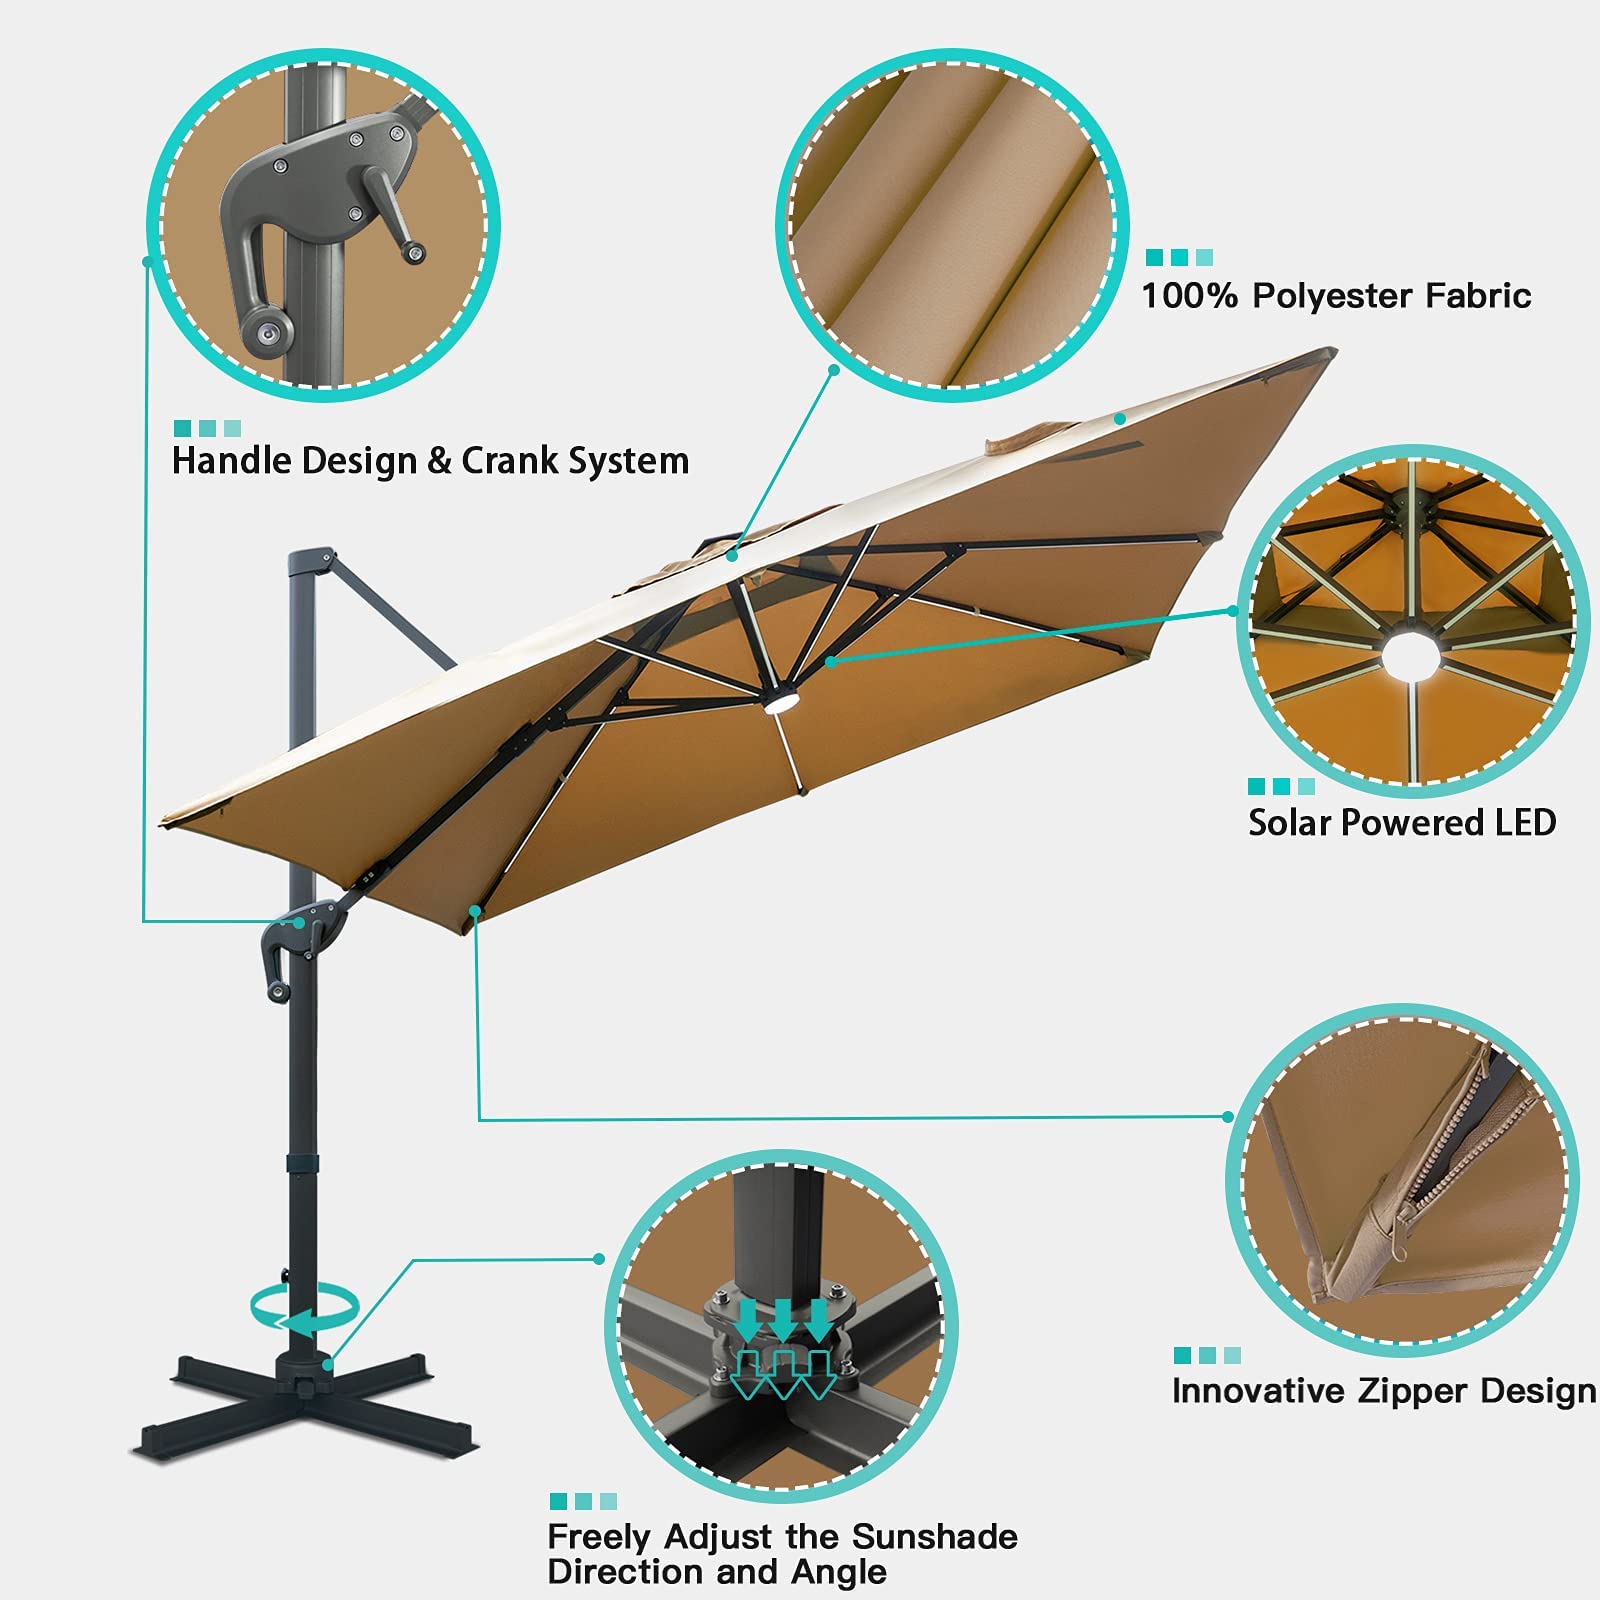 Sunnyglade 10x13ft Solar Powered LED Cantilever Patio Umbrella Square Deluxe Offset Umbrella 360°Rotation & Integrated Tilting System & LED lights for Market Garden Deck Pool Backyard Patio